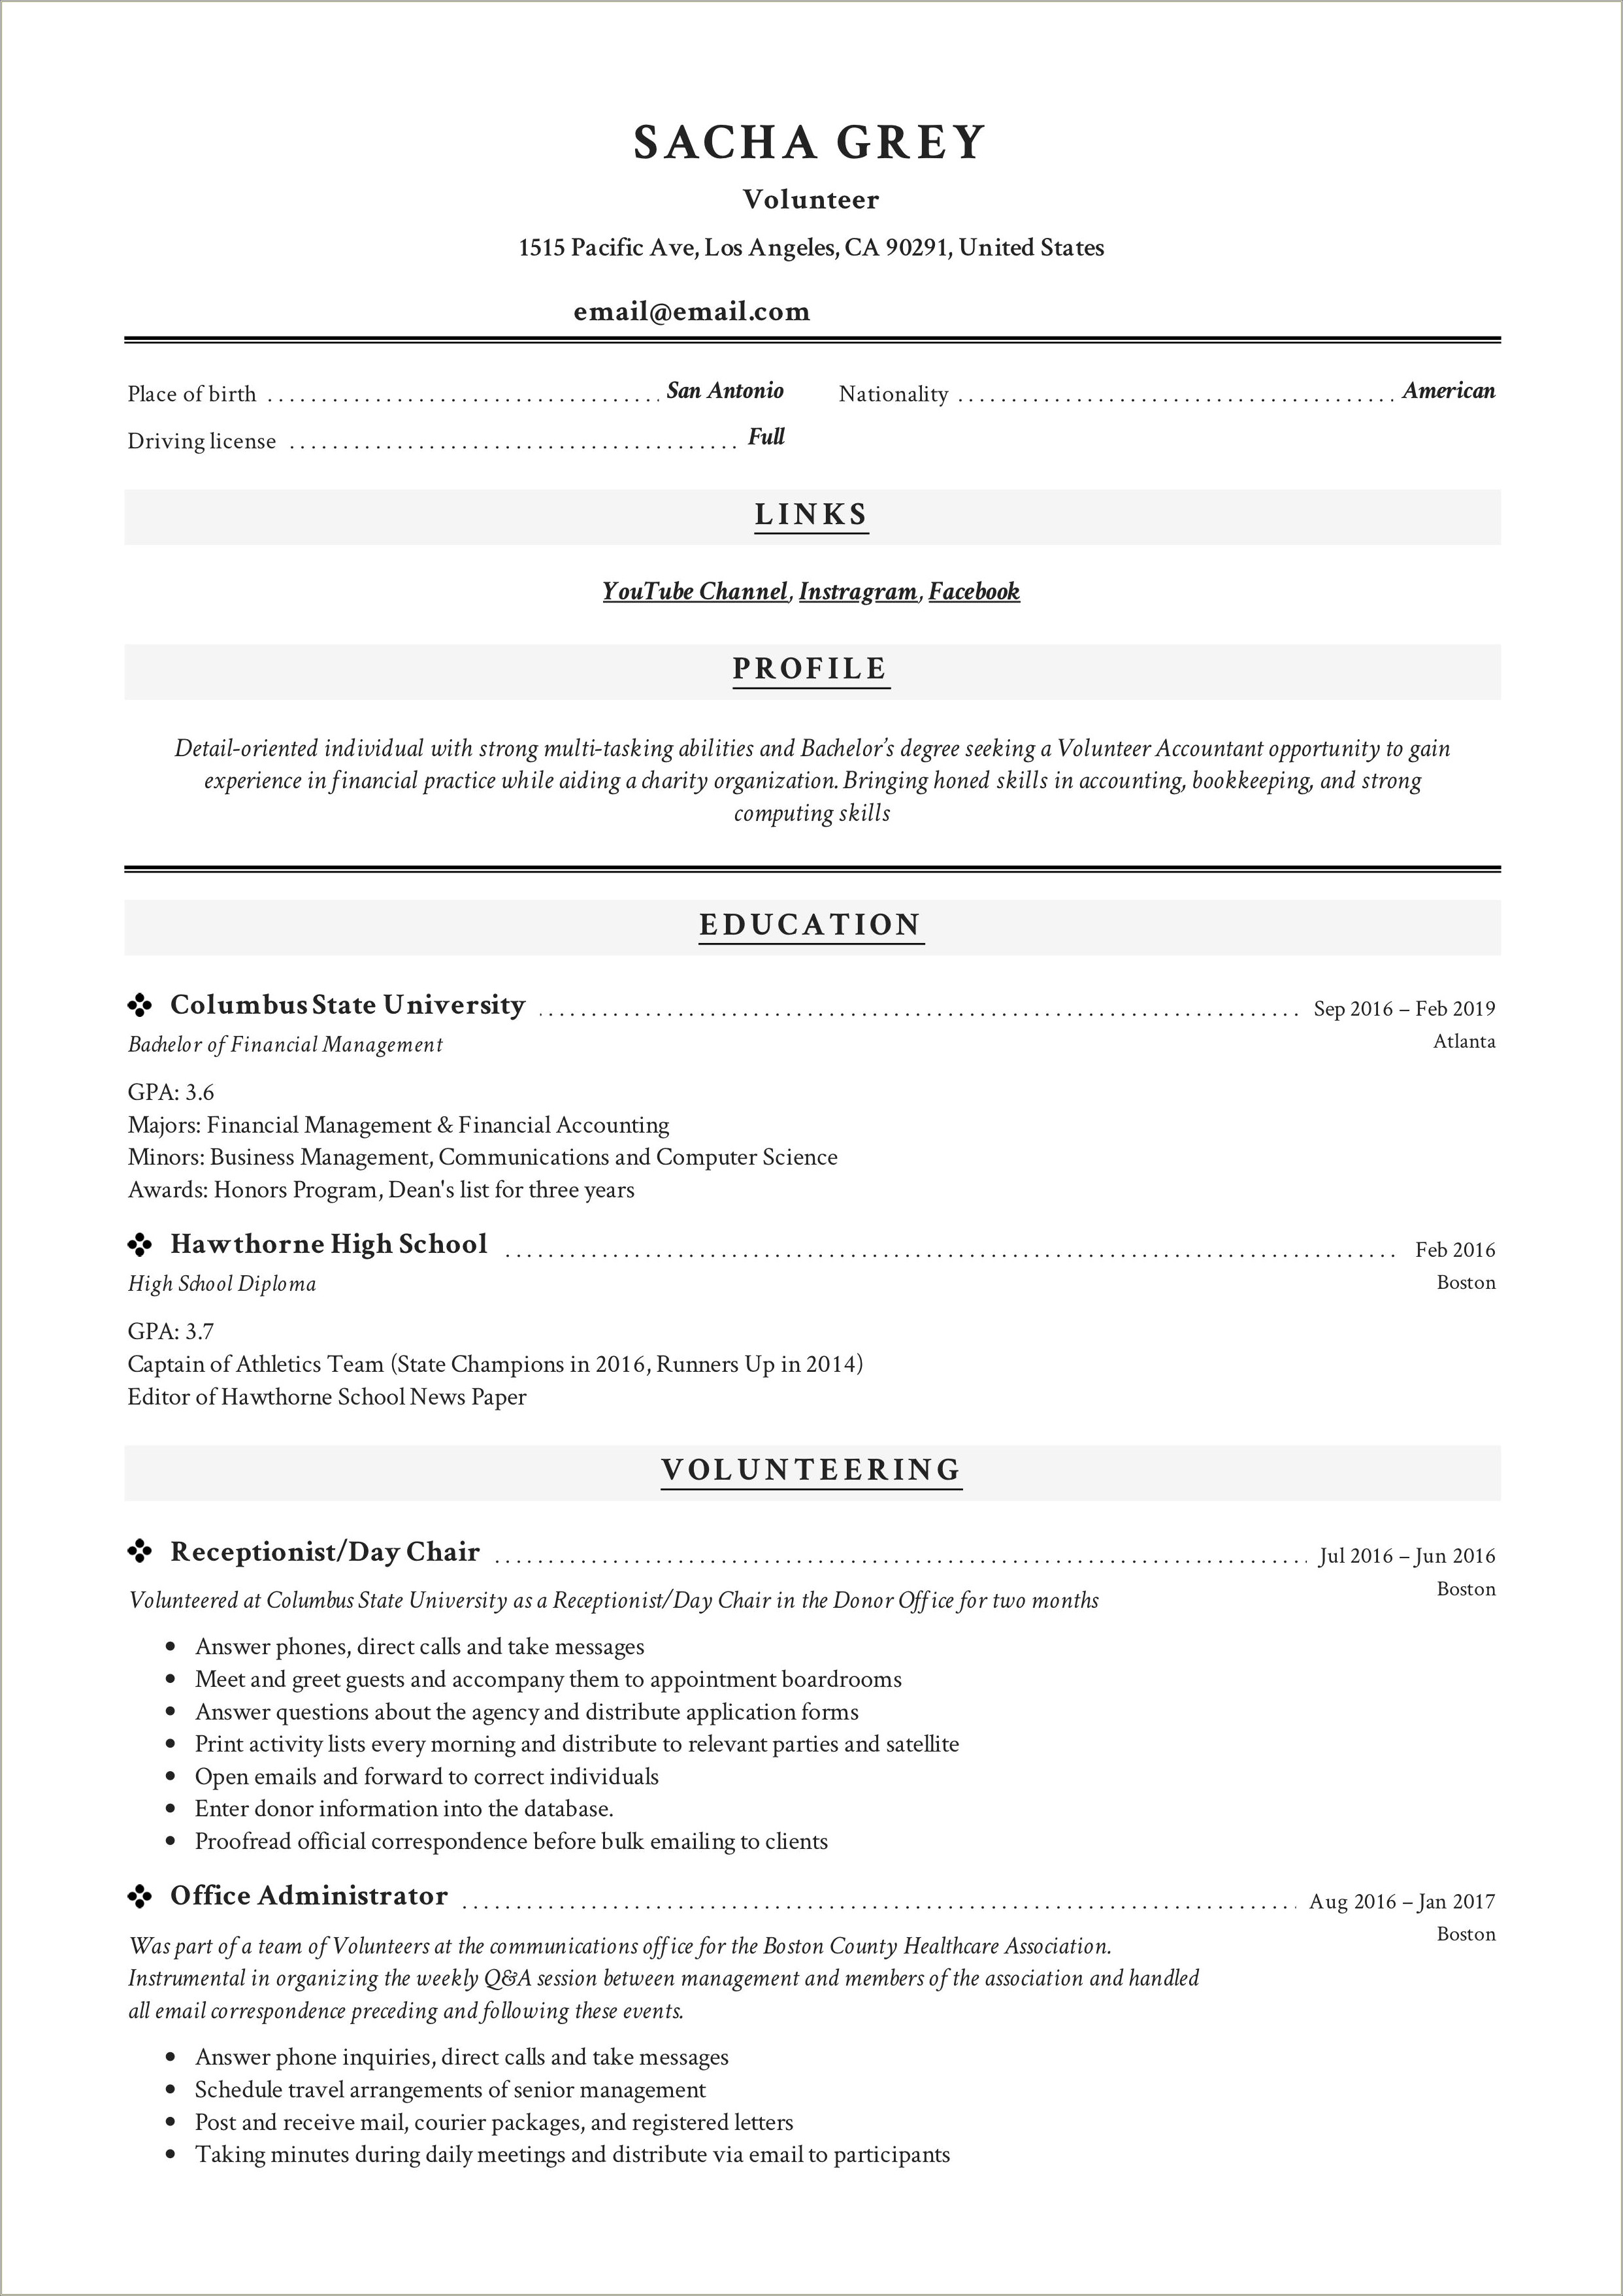 Where To List Volunteer Work On A Resume